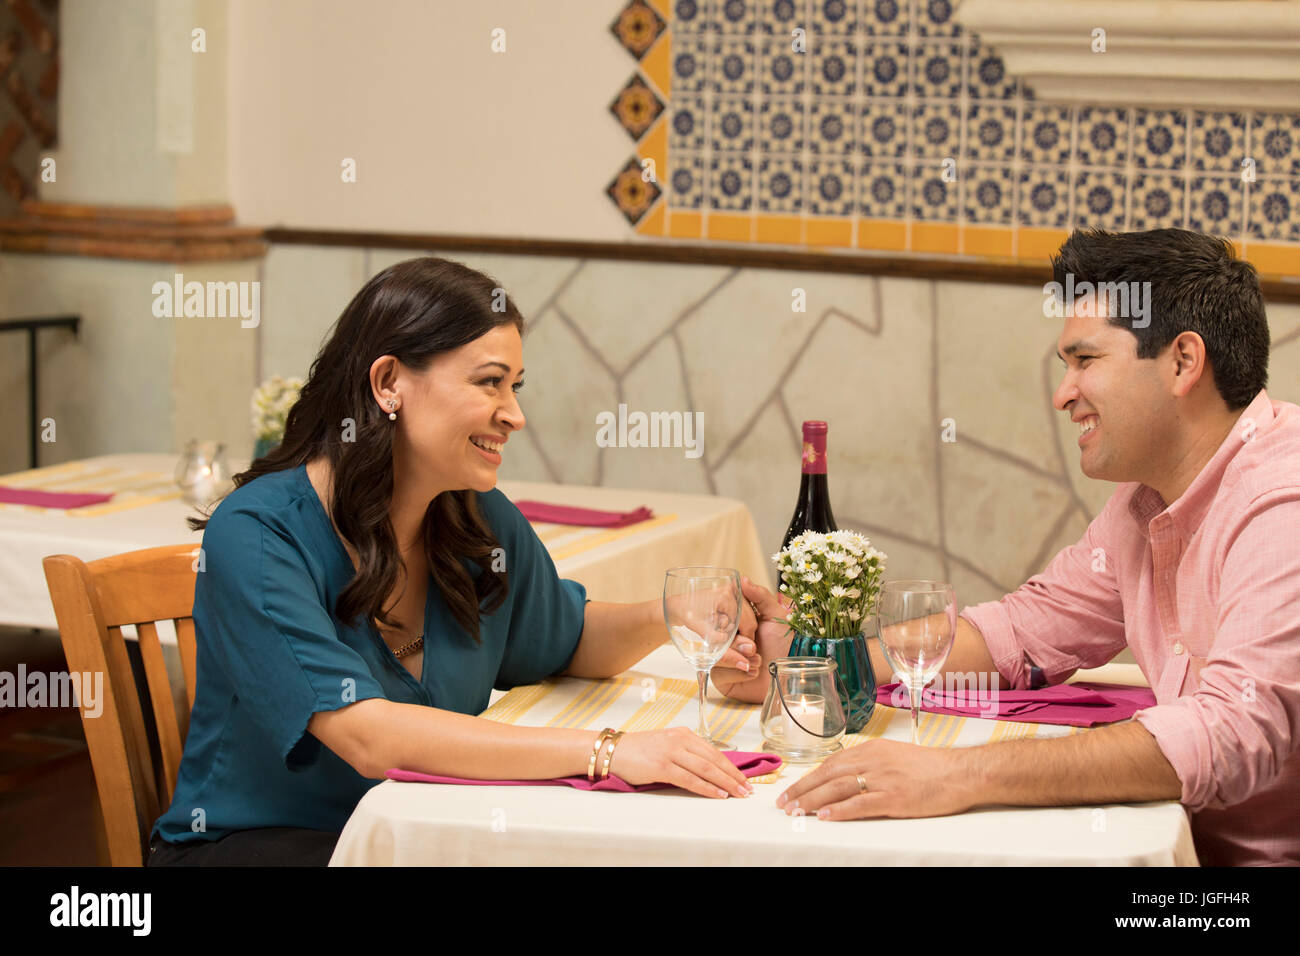 Hispanic couple holding hands at table in restaurant Stock Photo